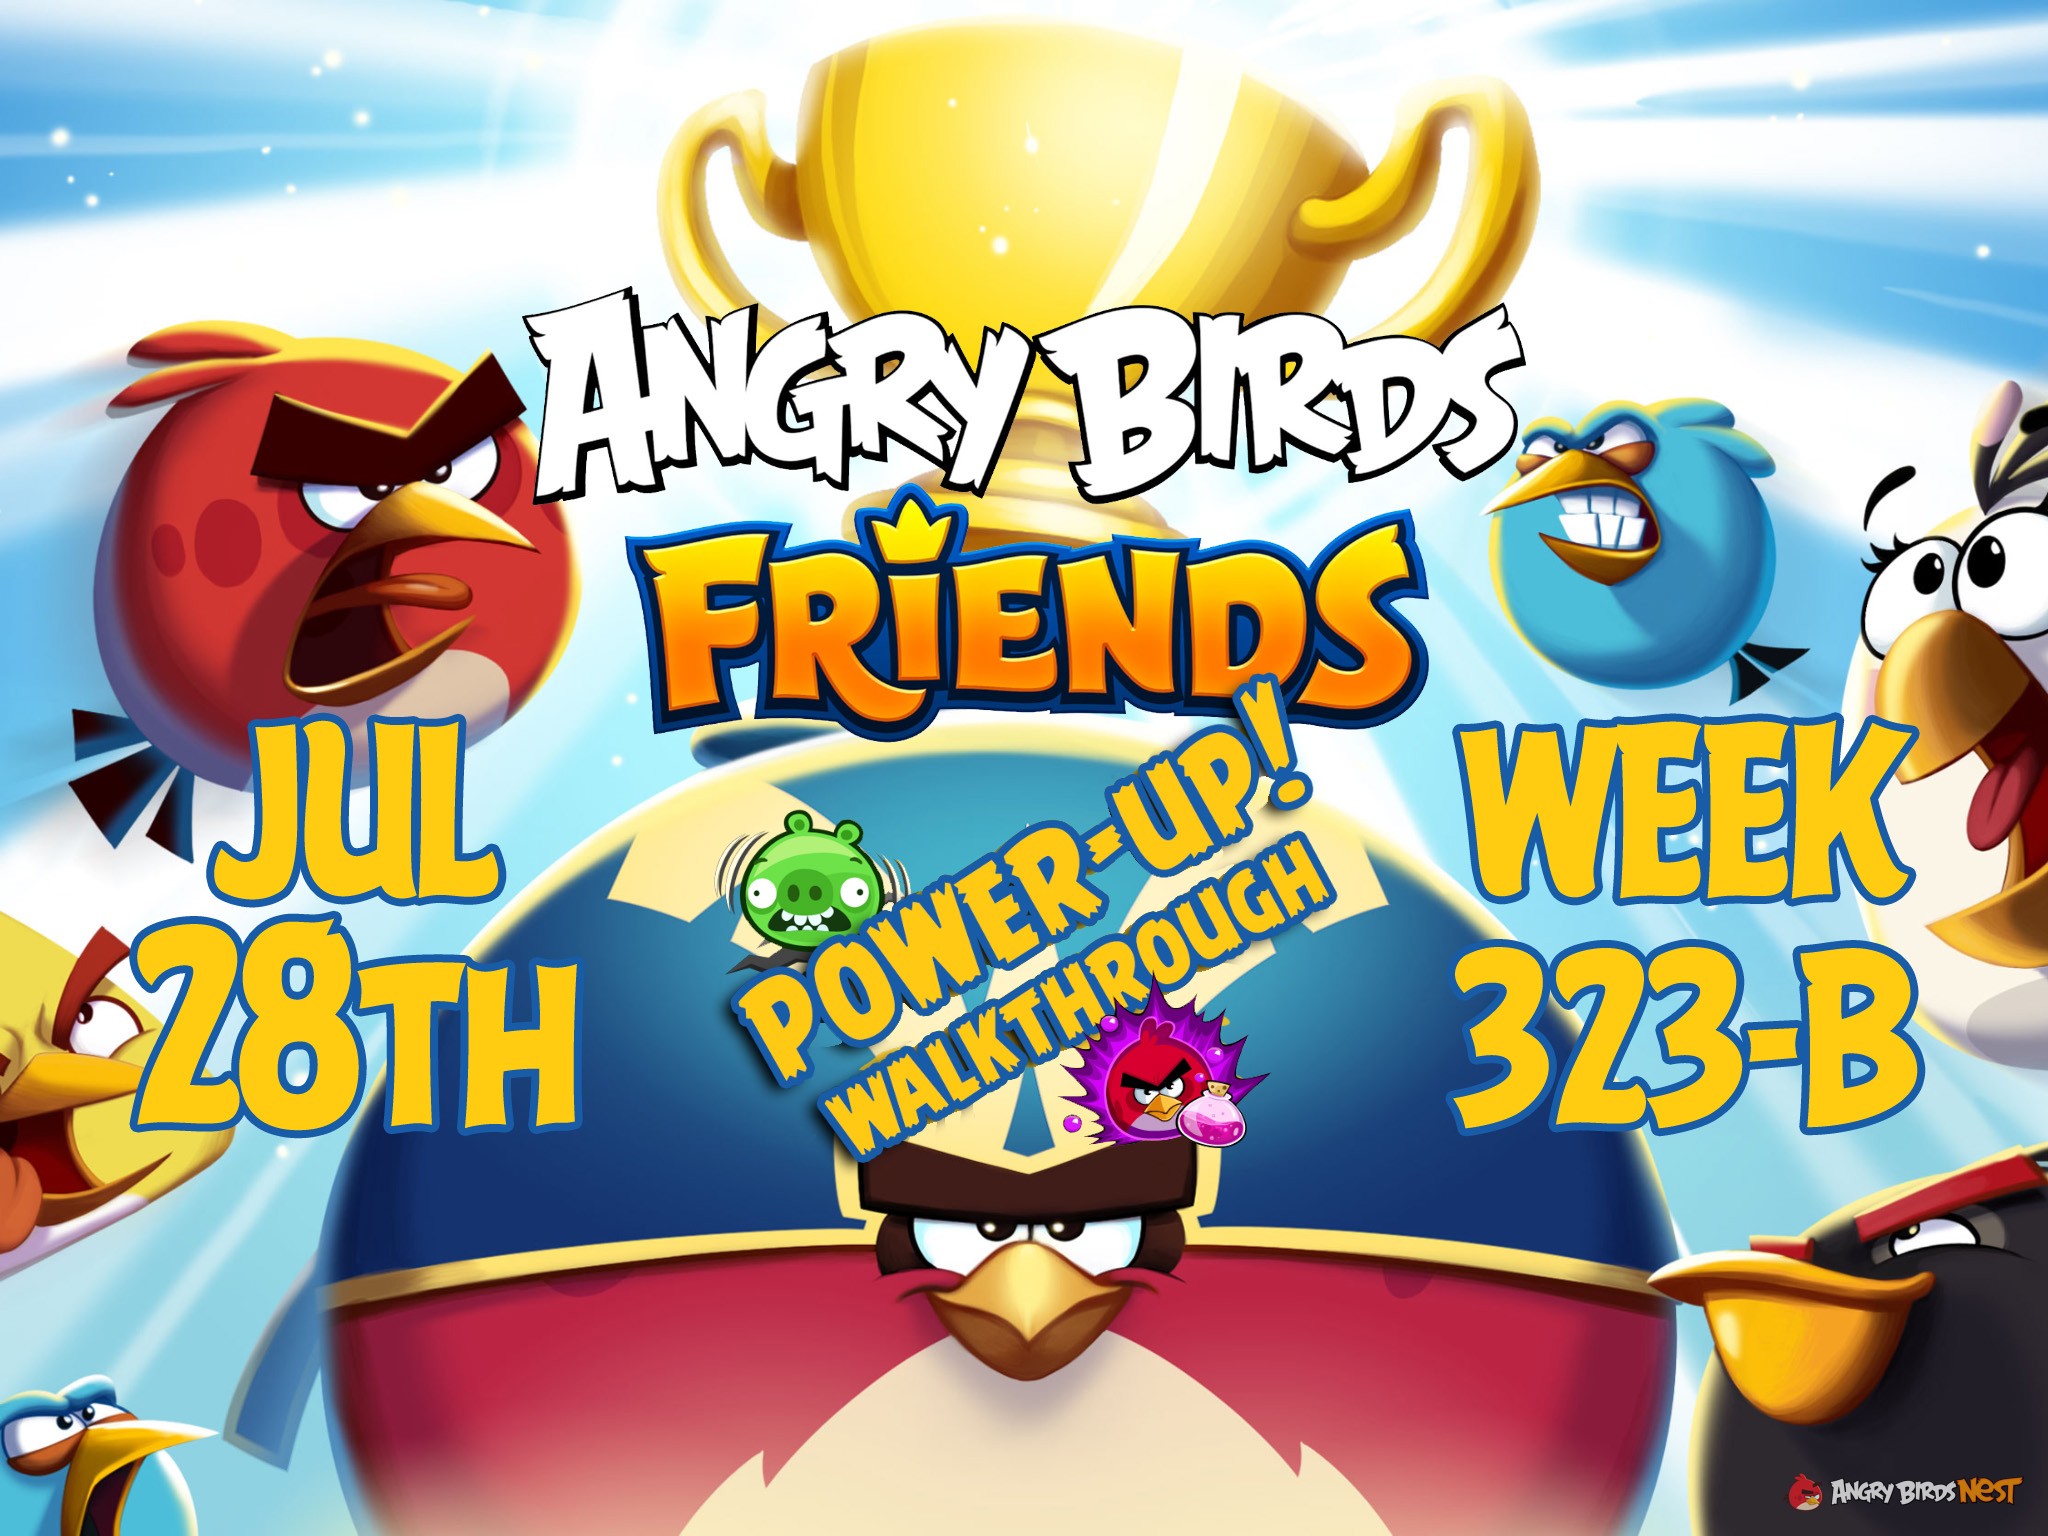 Angry-Birds-Friends-Tournament-Week-323-B-Feature-Image-PU